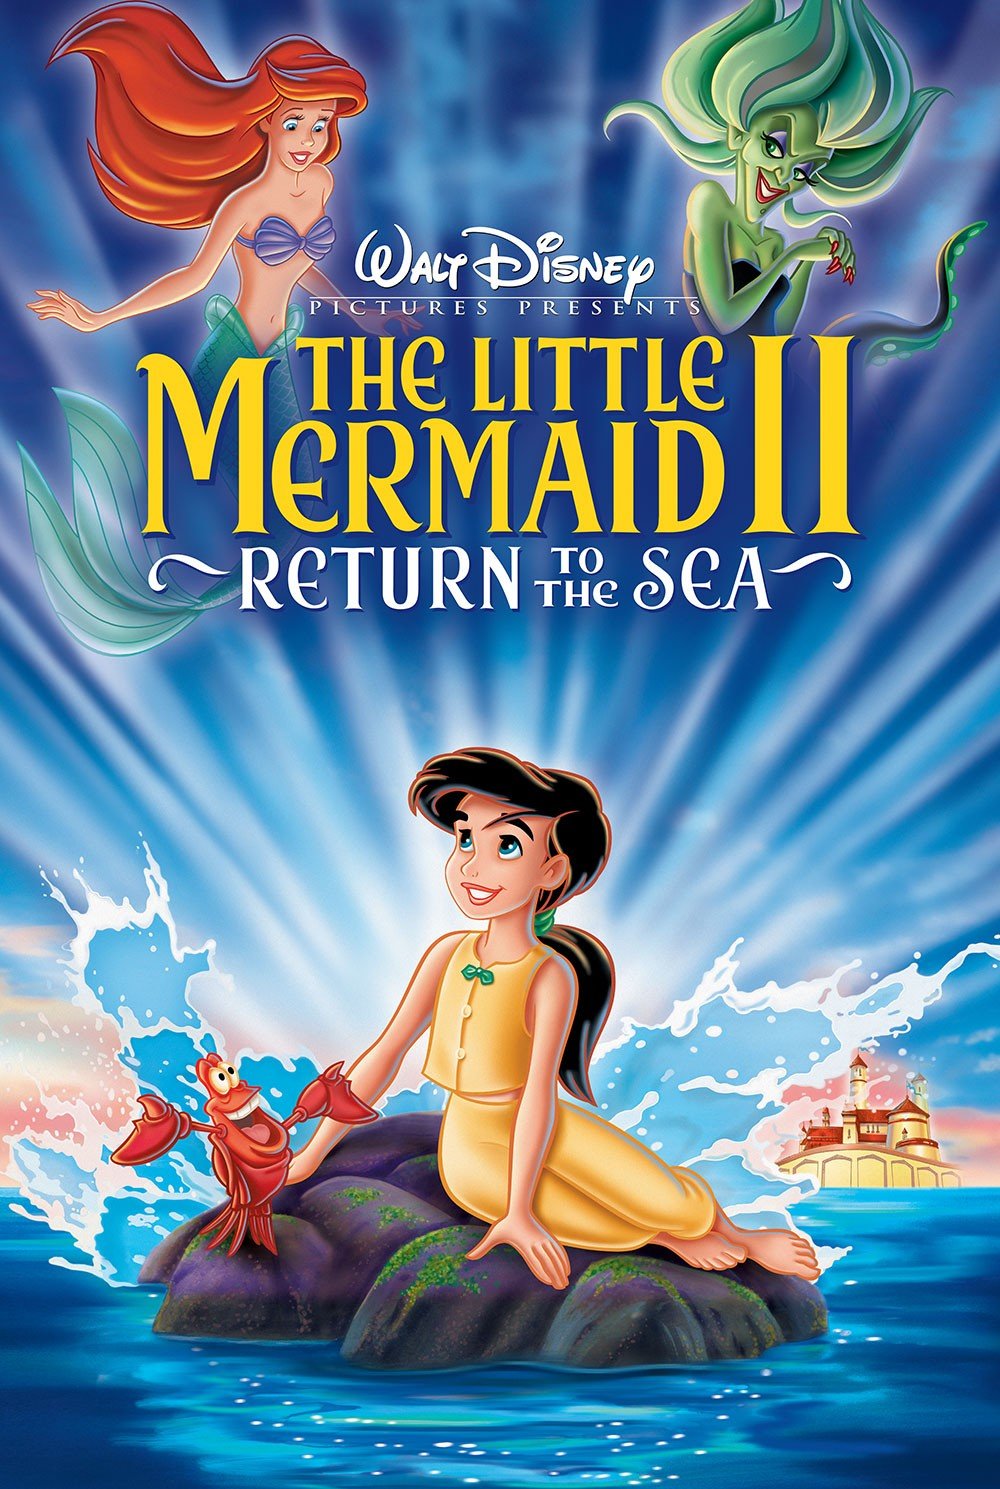 THE LITTLE MERMAID II RETURN TO THE SEA Movieguide Movie Reviews